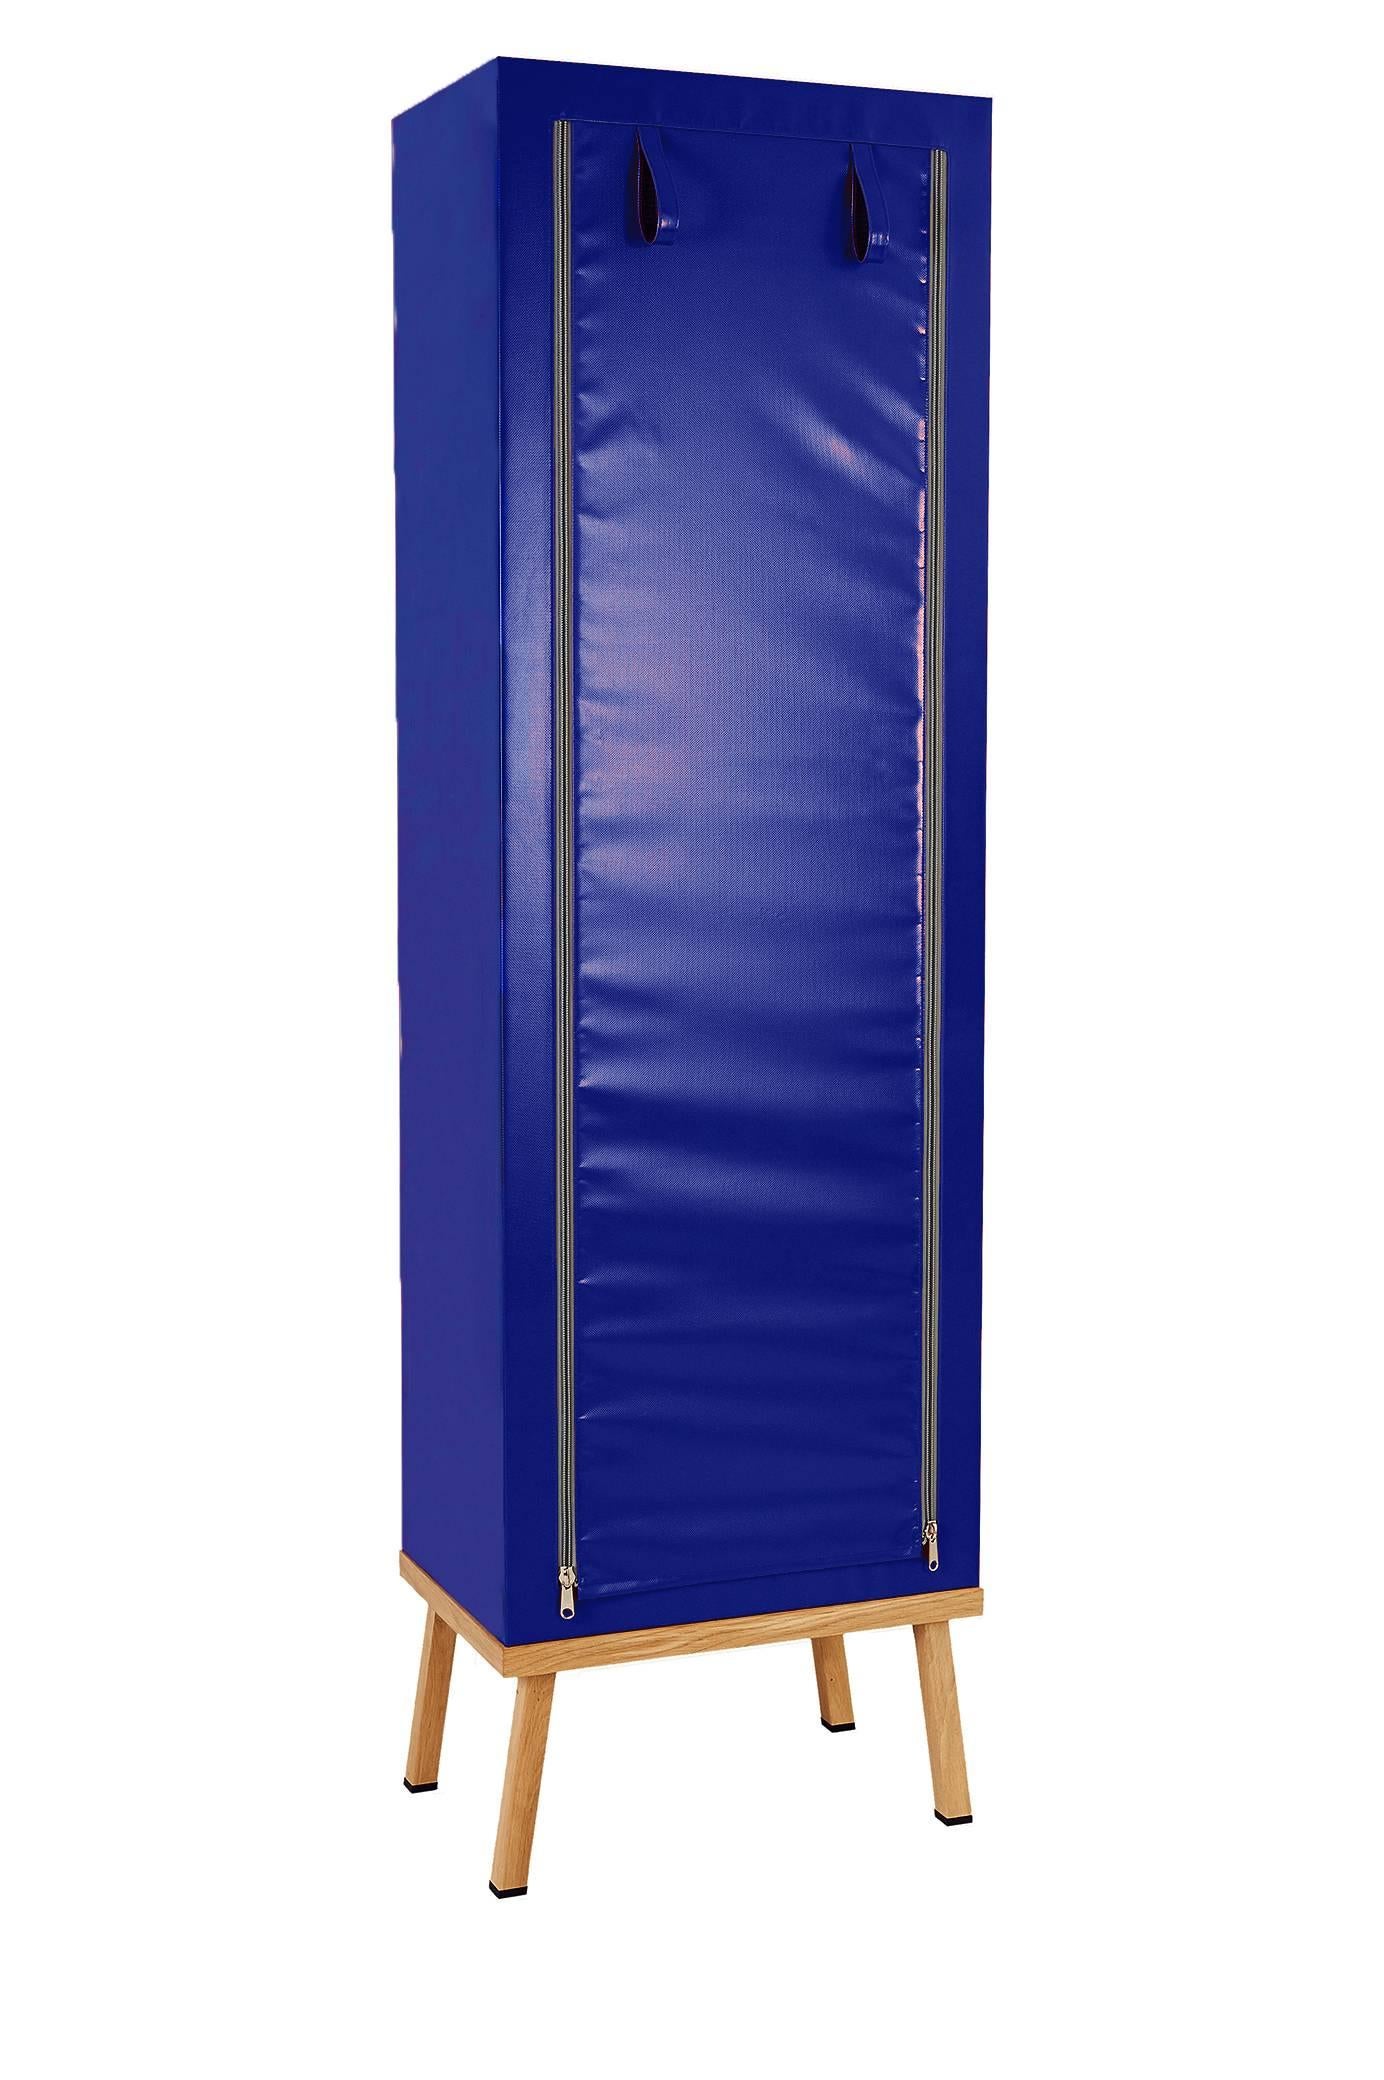 Visser and Meijwaard Truecolors cabinet in blue PVC cloth with zipper opening

Designed by Visser en Meijwaard 
Contemporary, Netherlands, 2015
PVC cloth, oakwood, rubber
Measures: H 78.75 inches, W 23.75 inches, D 15.75 inches. 

Lead time